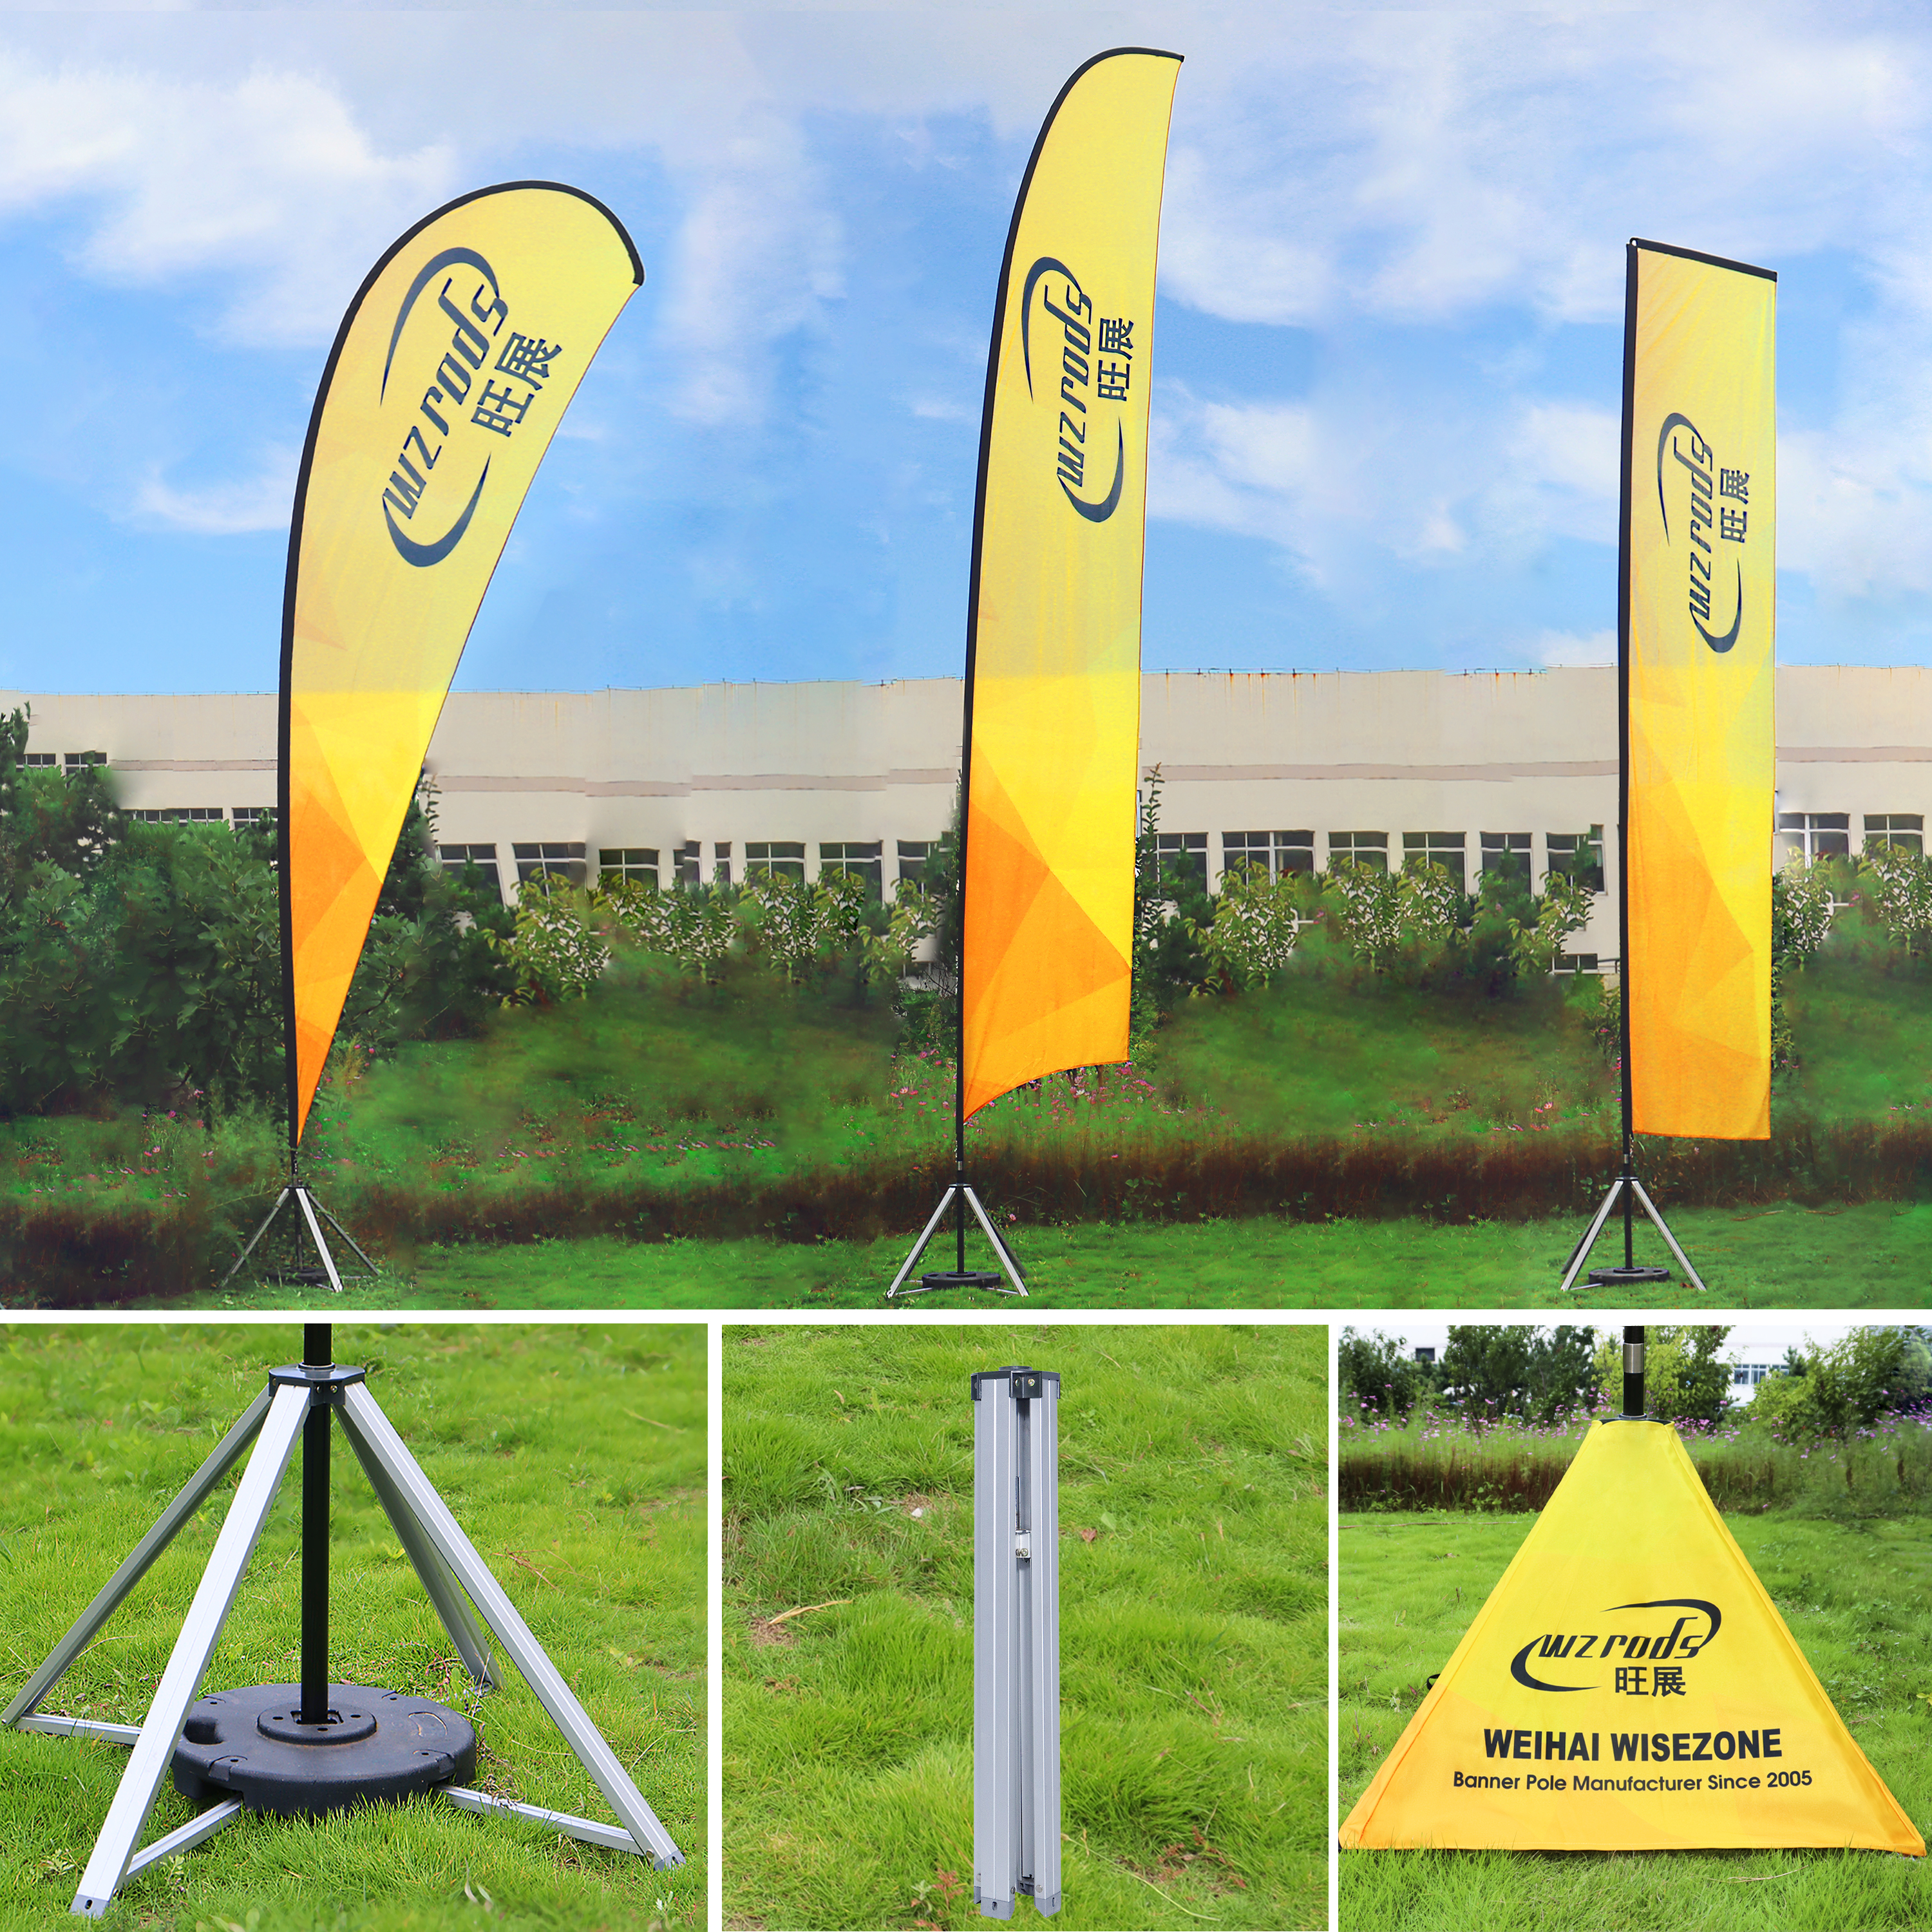 7 major selling points of Wzrods' innovative Giant flagstand